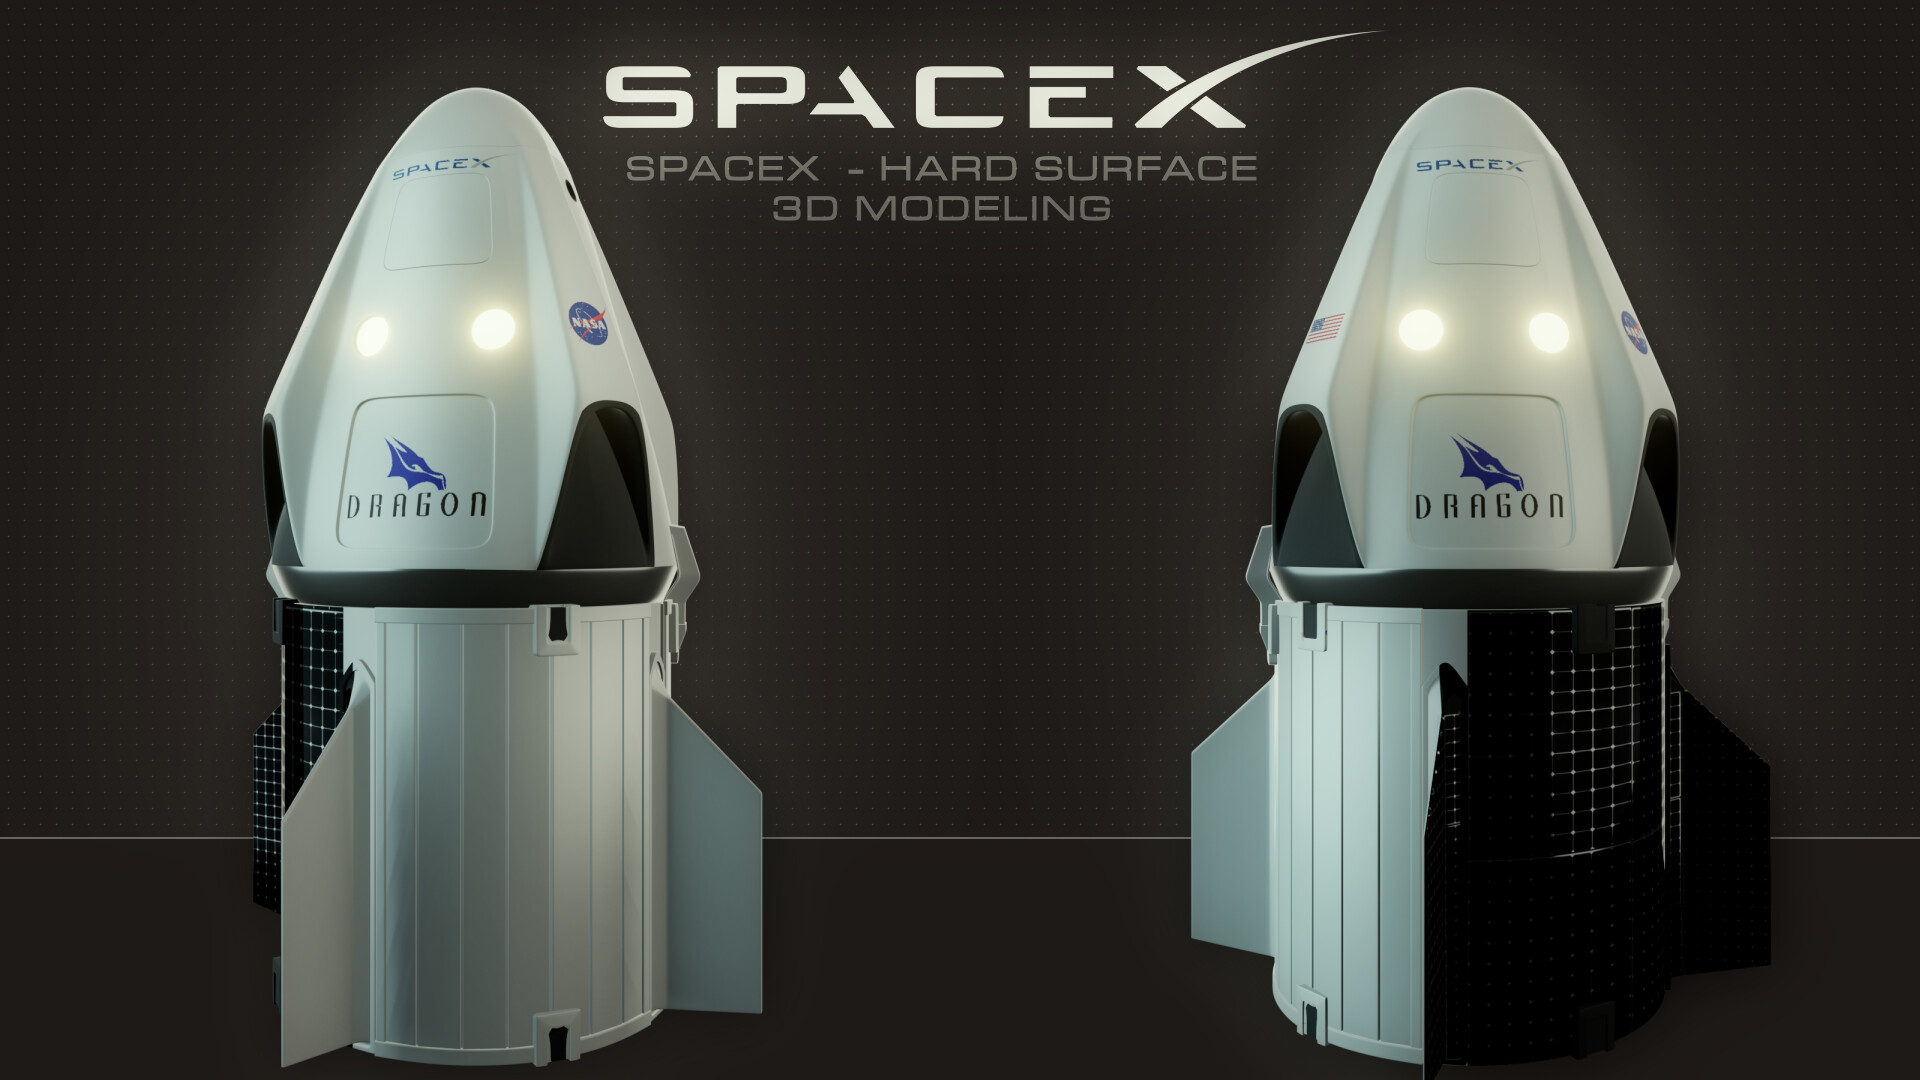 SpaceX Crew Dragon Spacecraft 3D model rigged